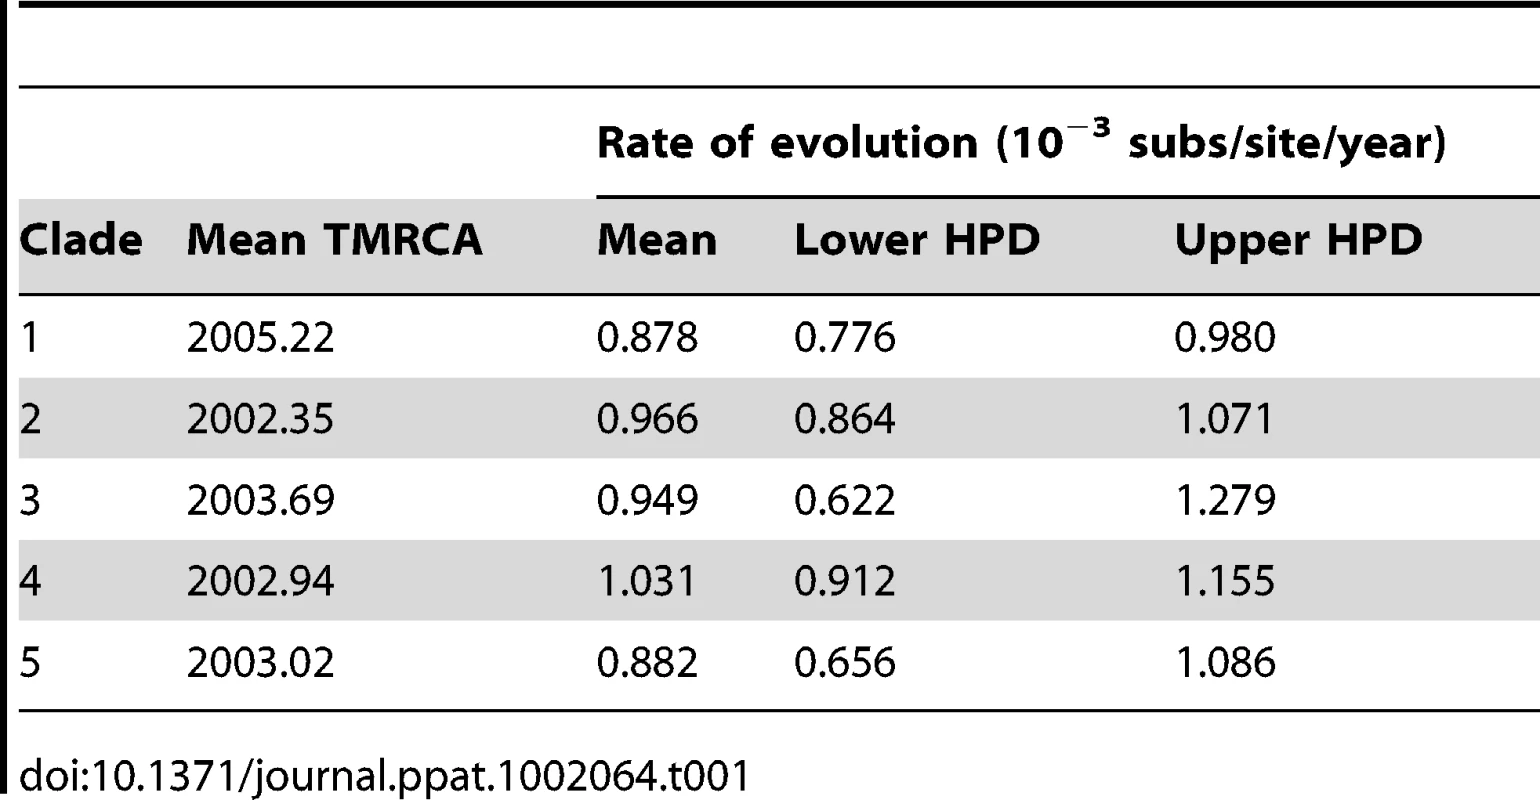 Rate of nucleotide substitution of DENV-1 for each clade in Viet Nam, and the inferred time of the most recent common ancestor (TMRCA).